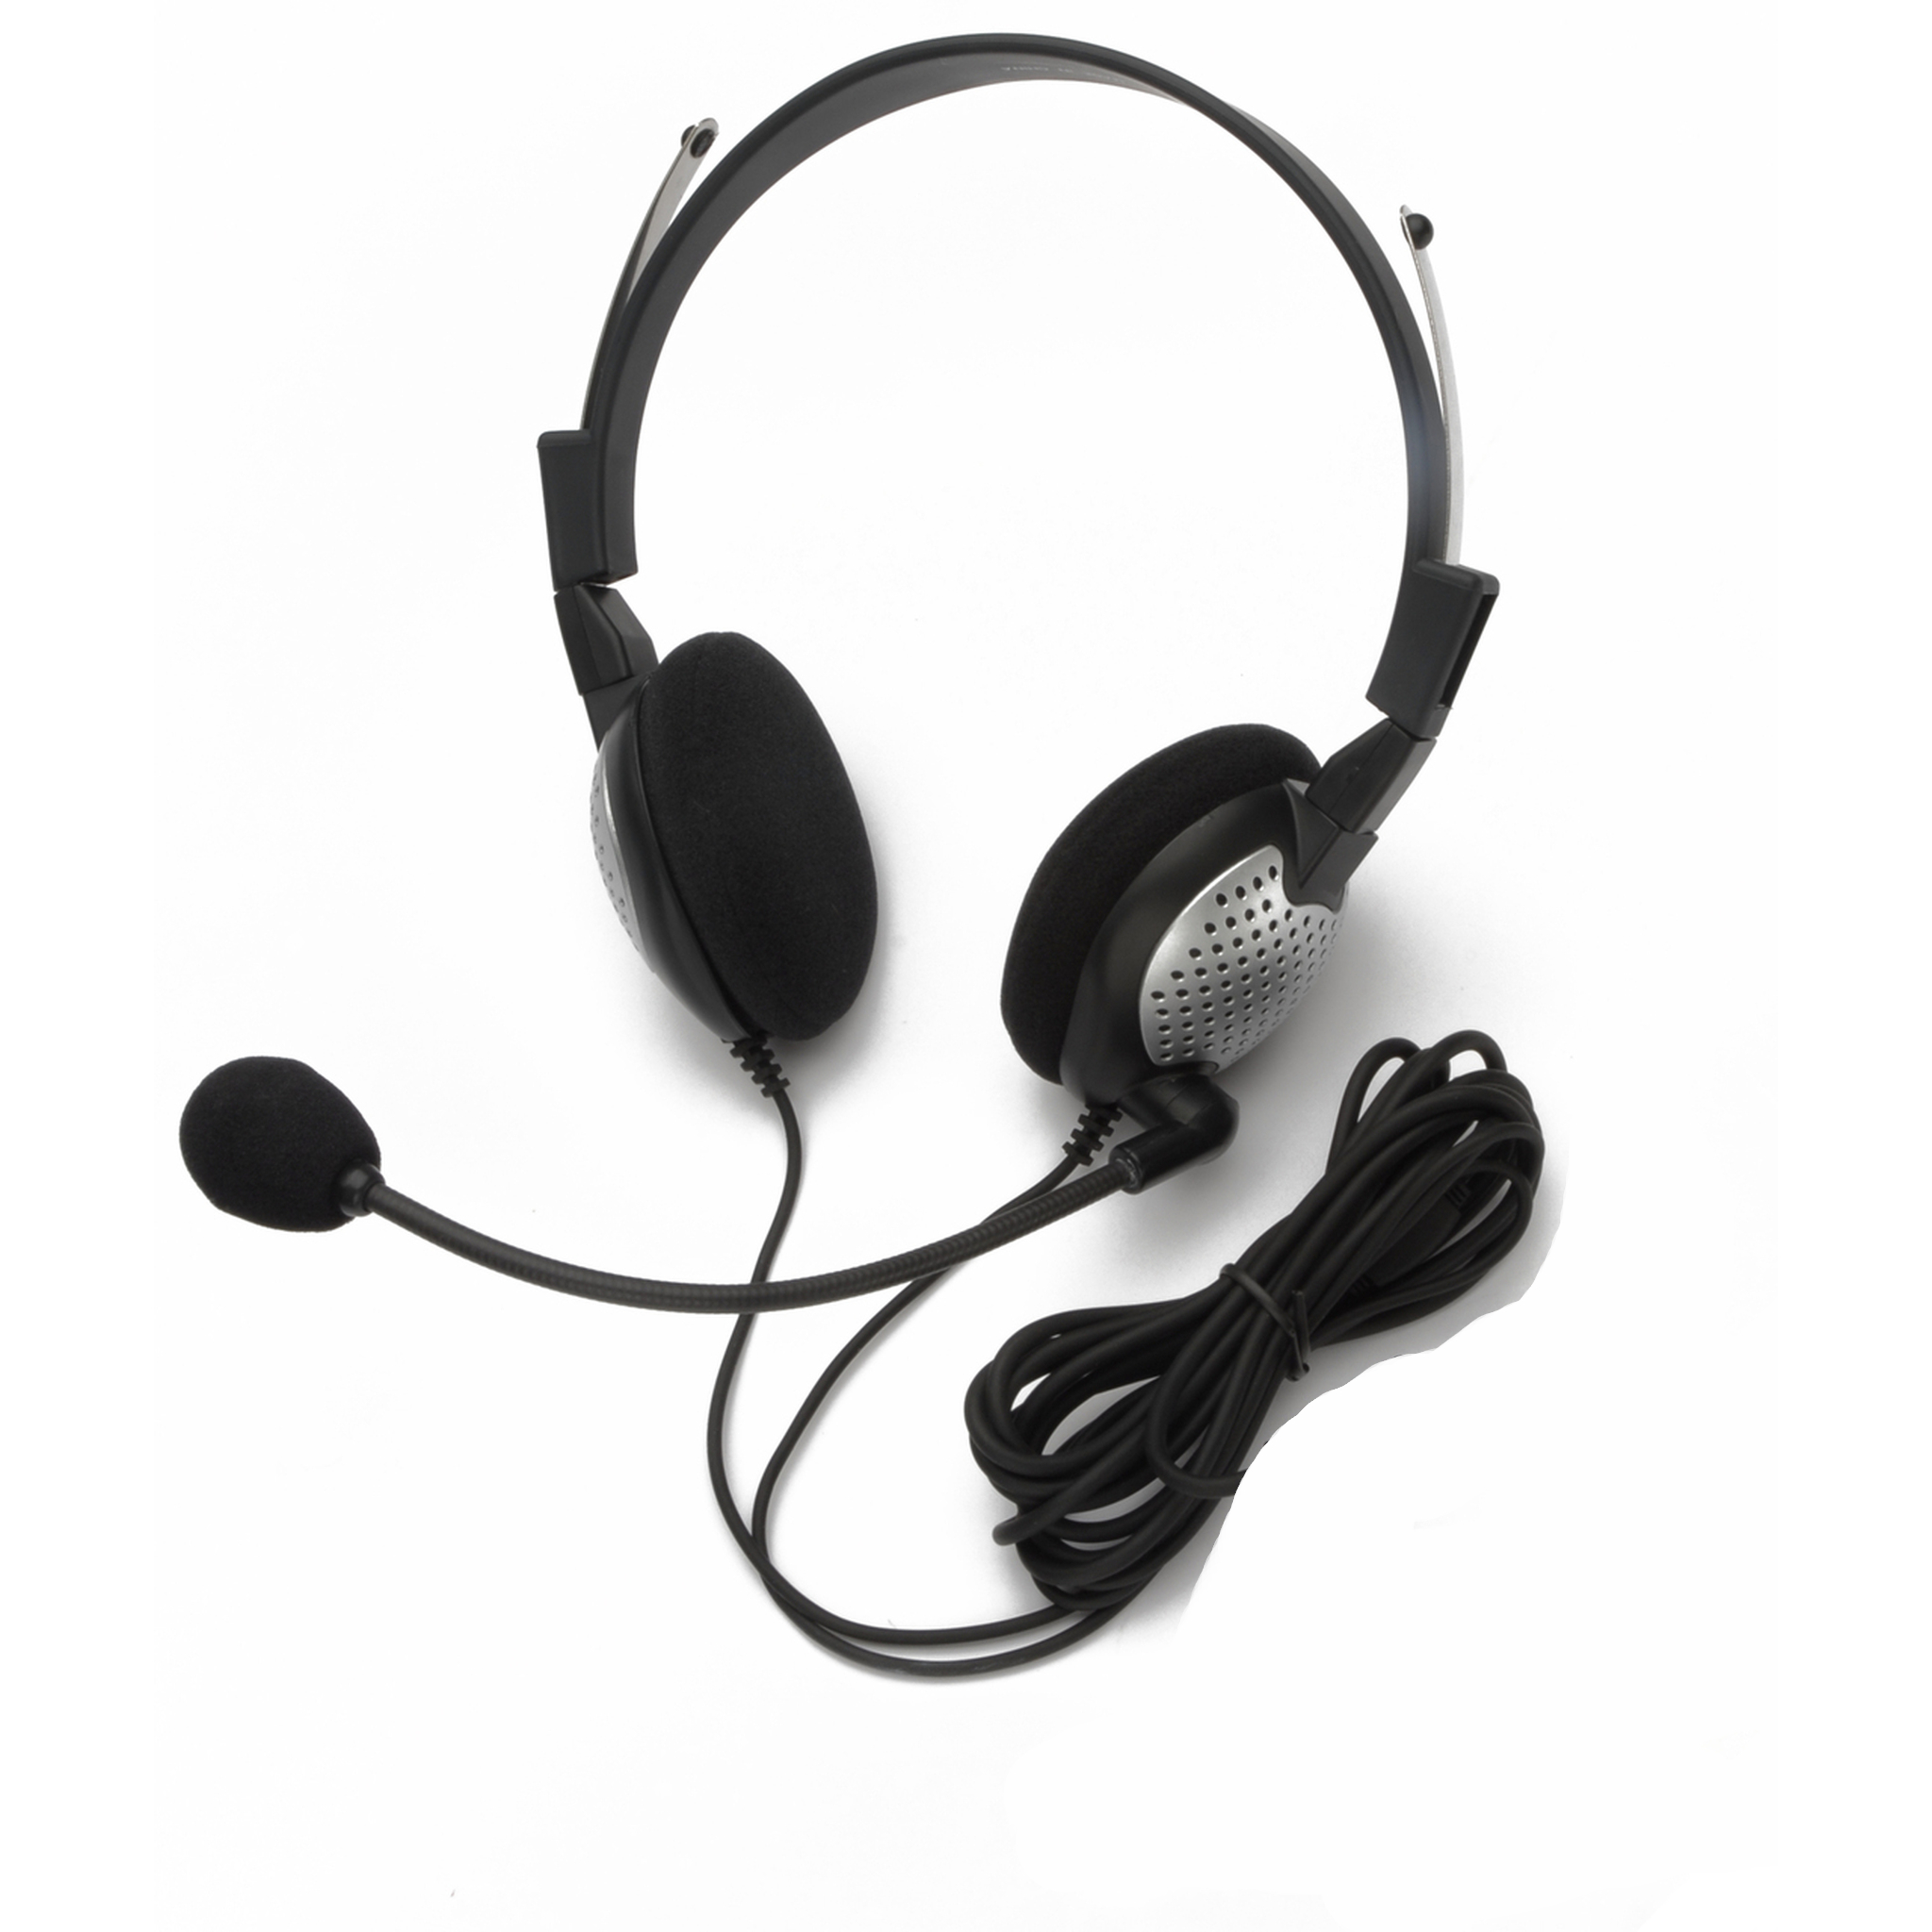 Andrea Communications NC-185 Stereo Headset Questions & Answers